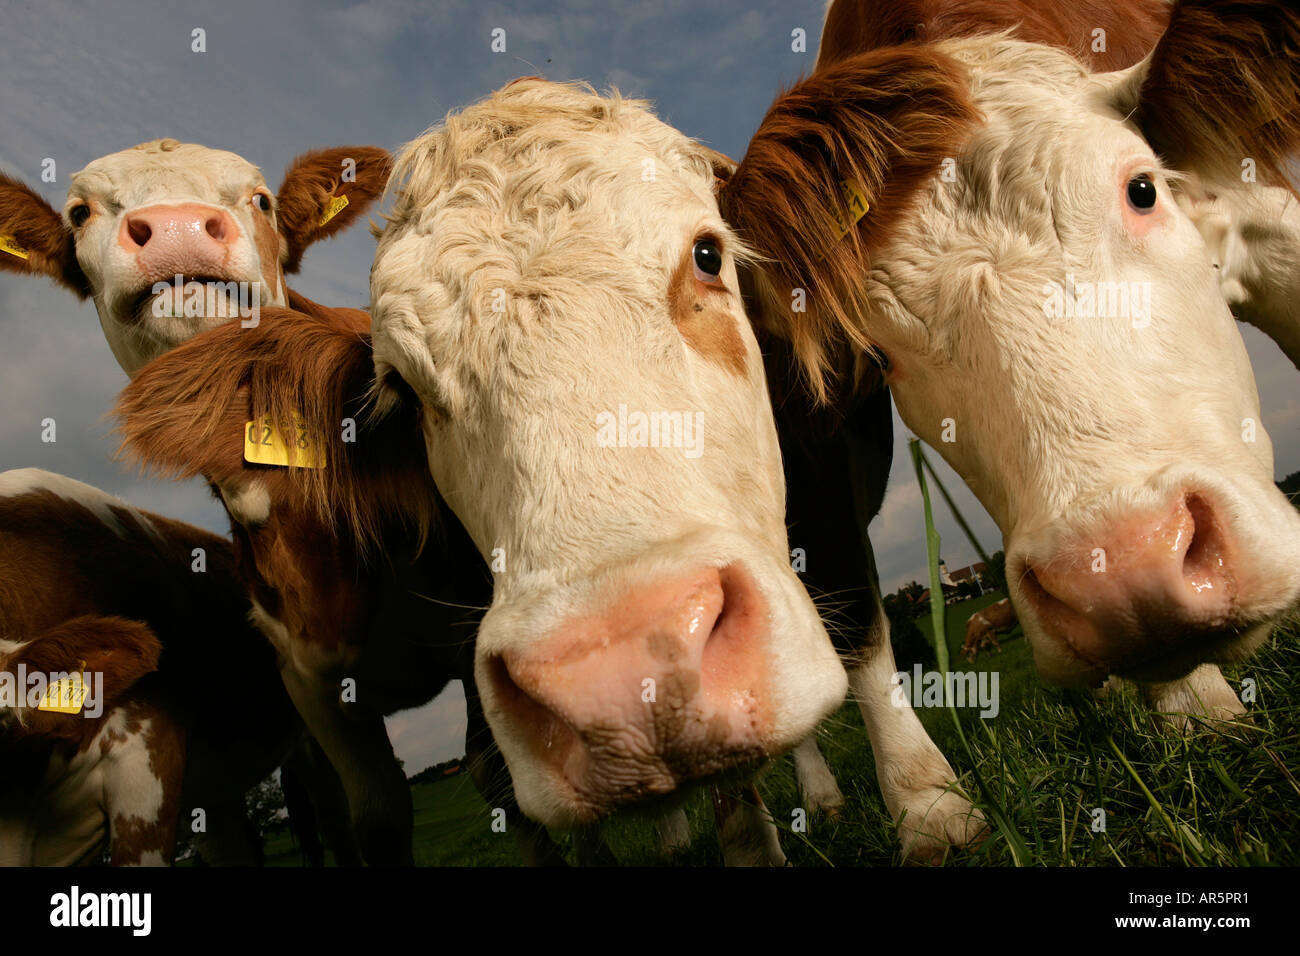 Flock of cows, front view Stock Photo